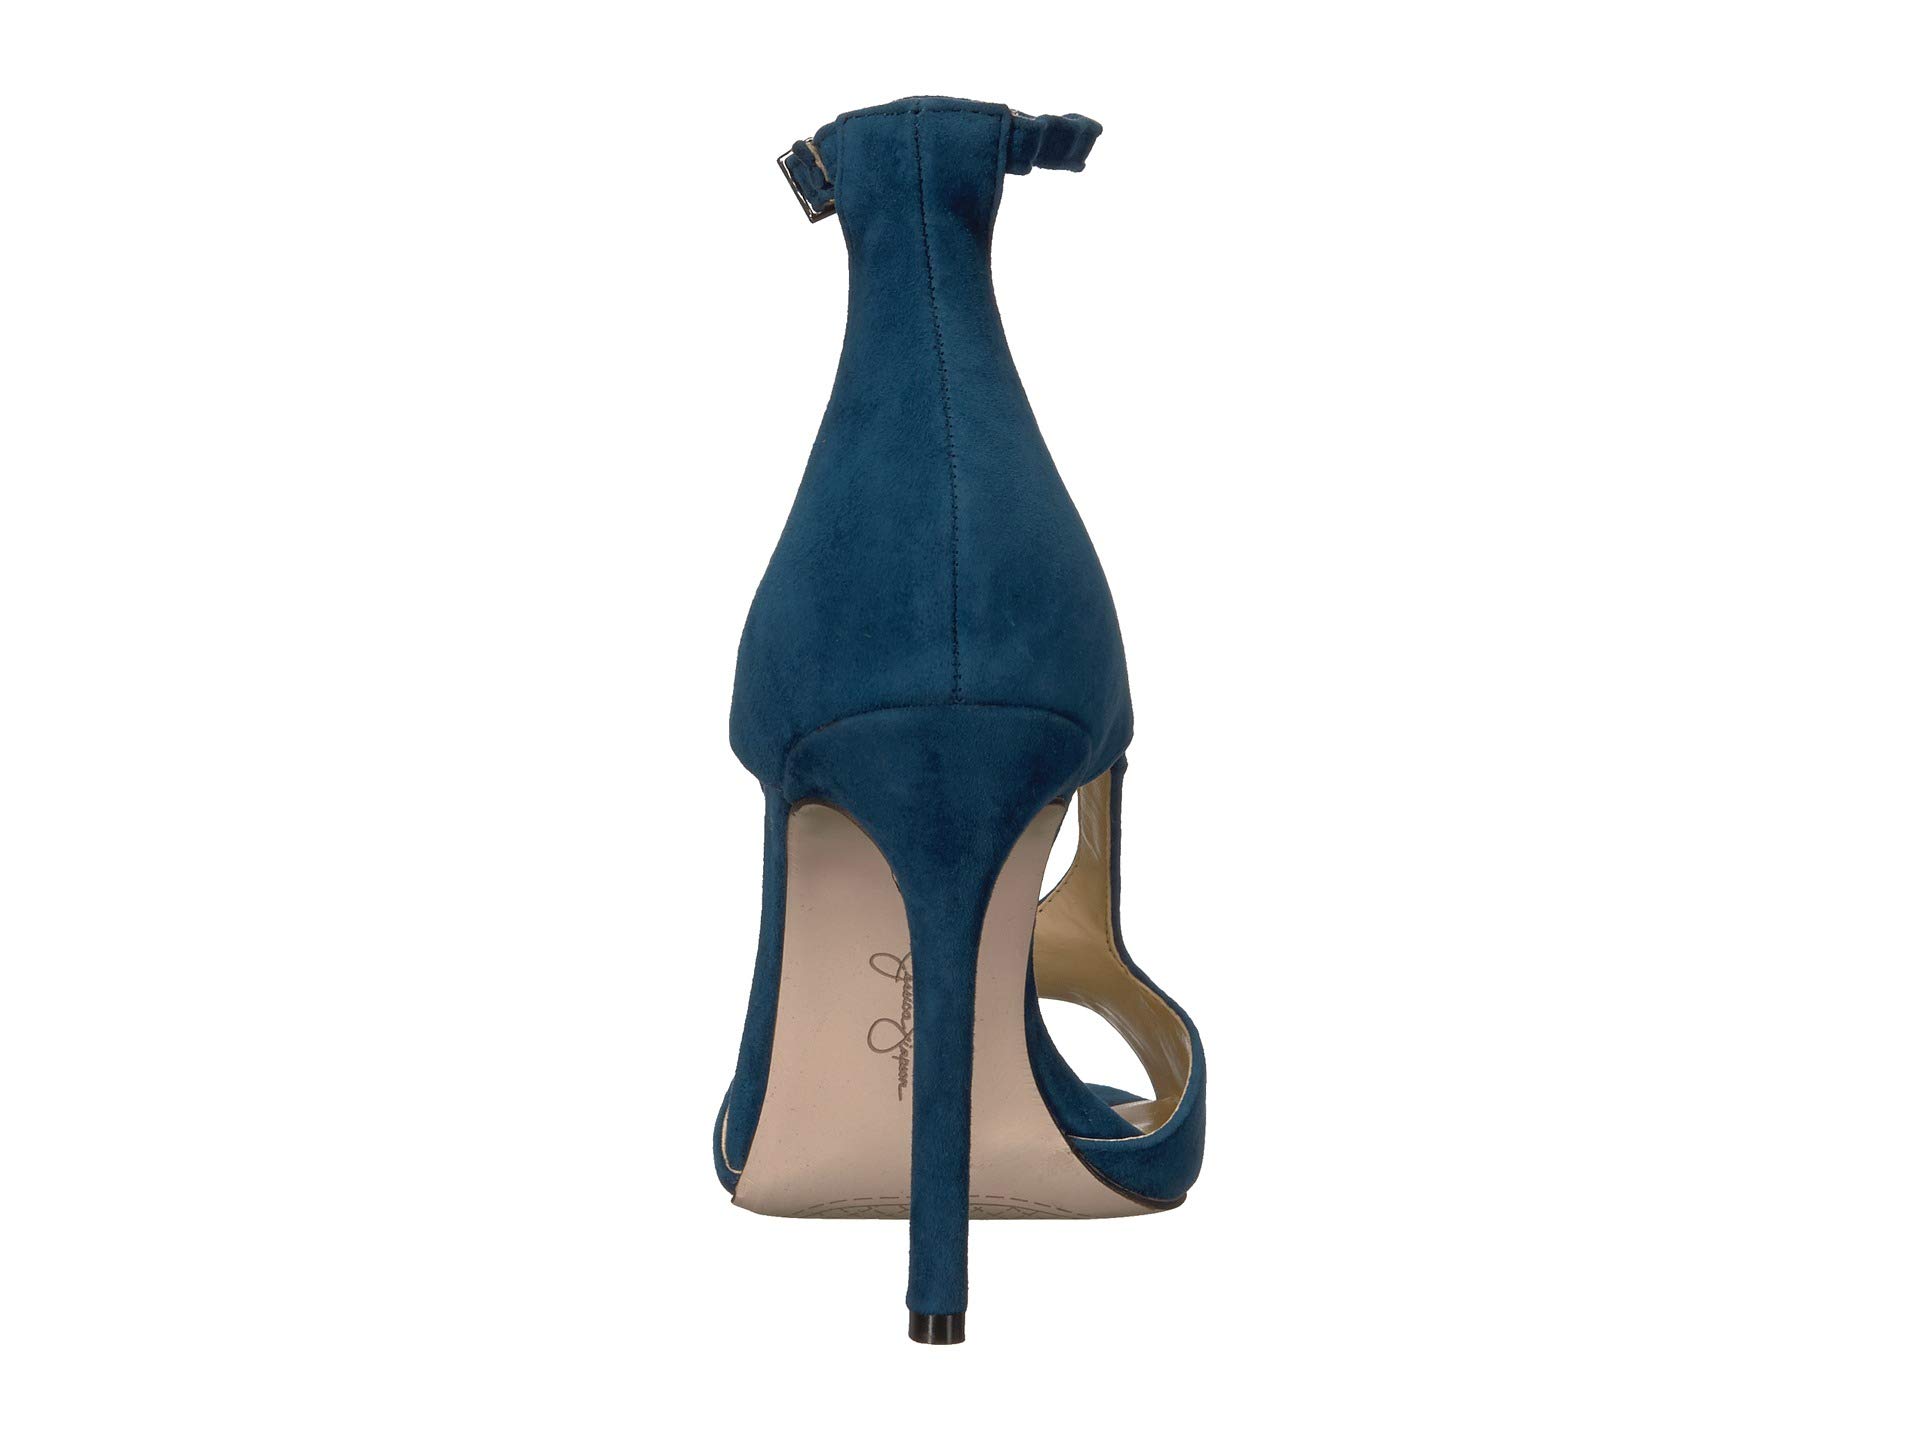 Jessica Simpson Women's Jasta Suede Azurite Ankle-High Leather Pump - 5.5M - image 4 of 5